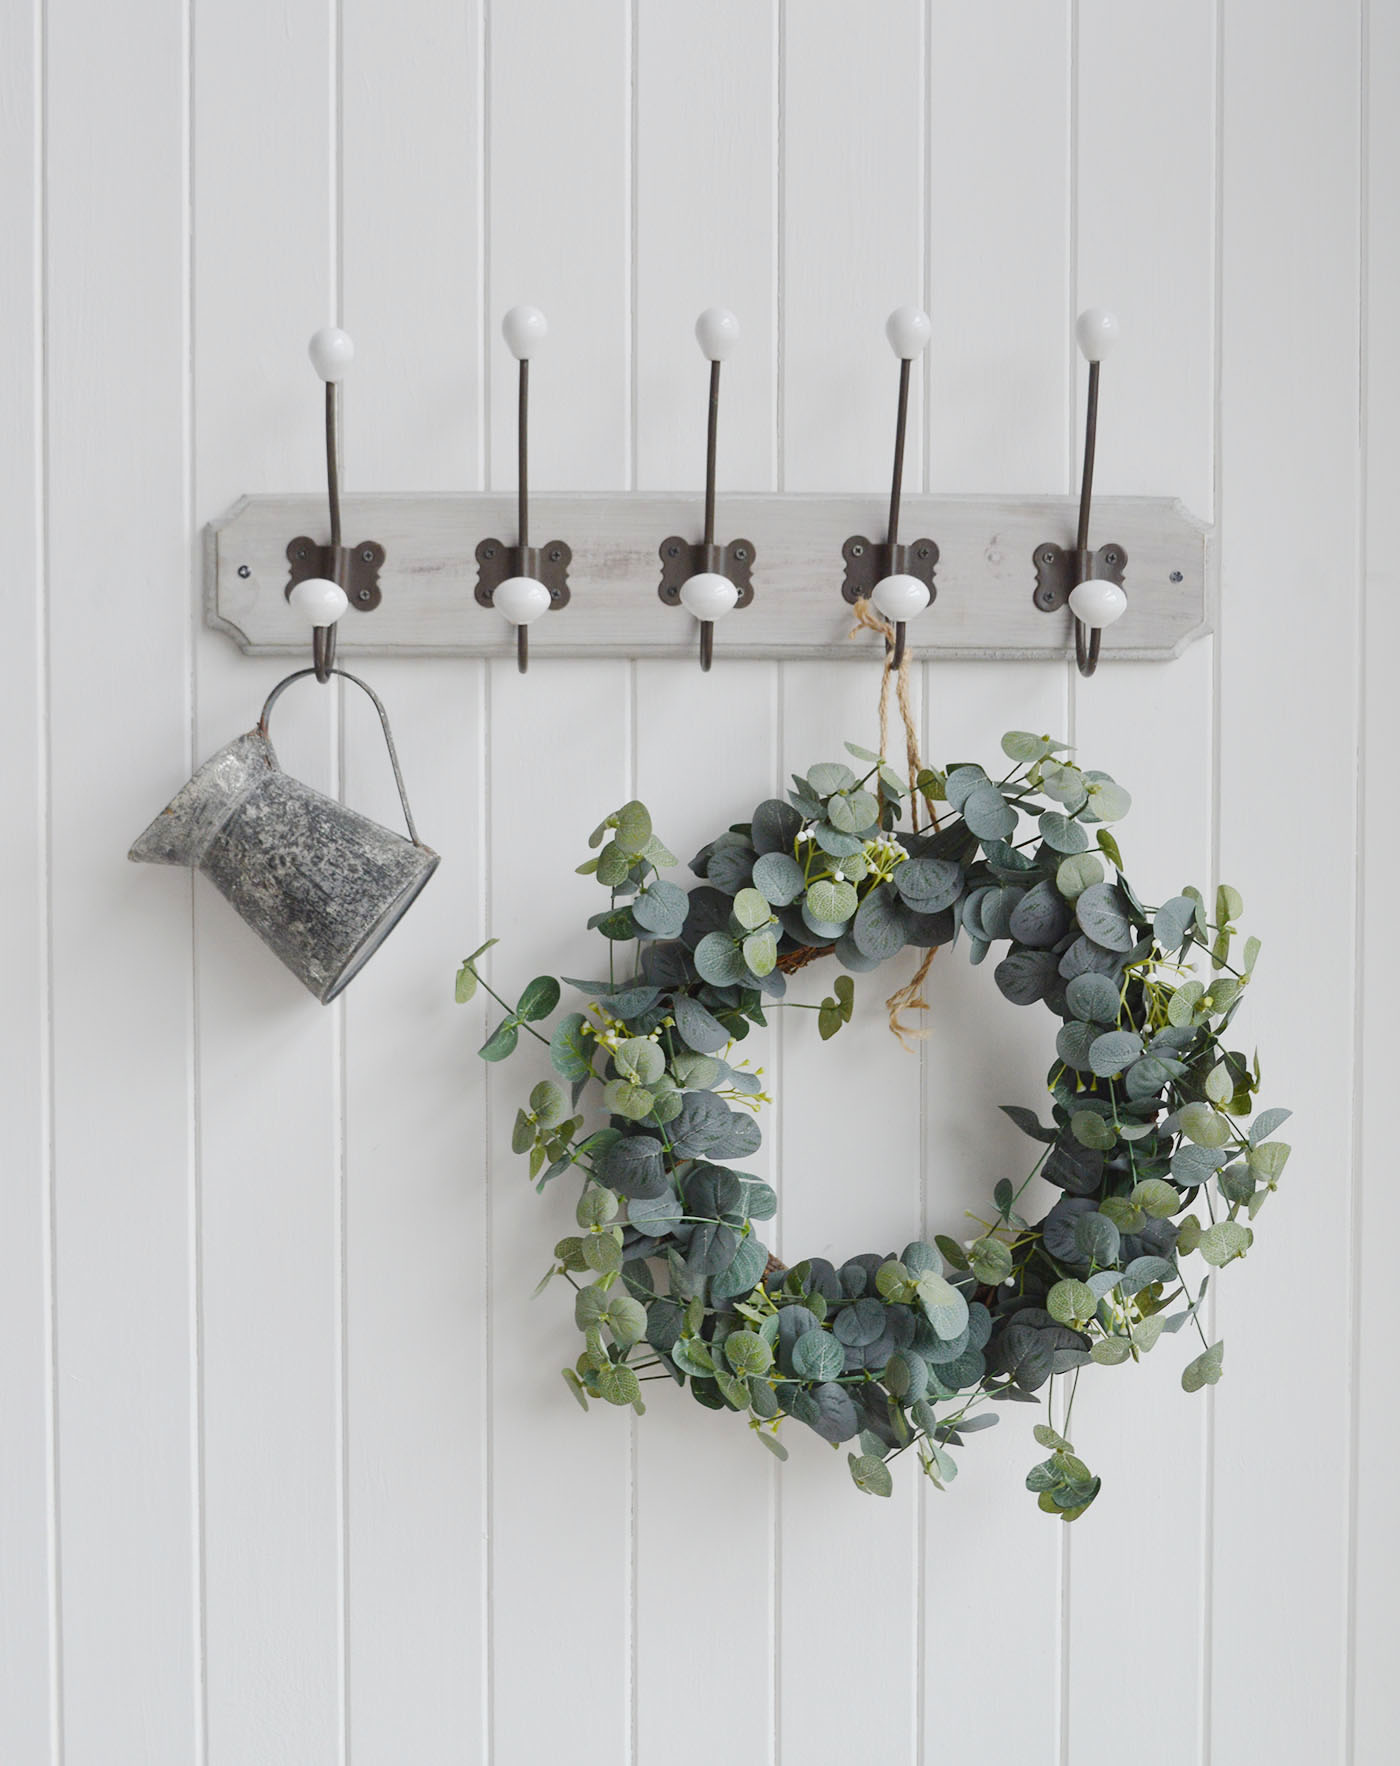 A wall mounted coat rack with three aged metal double hooks with porcelain ends on a rustic grey washed wooden backing.

The Pawtucket Range is a range of furniture and home decor made from grey wash reclaimed wood for an authentic distressed rustic look .